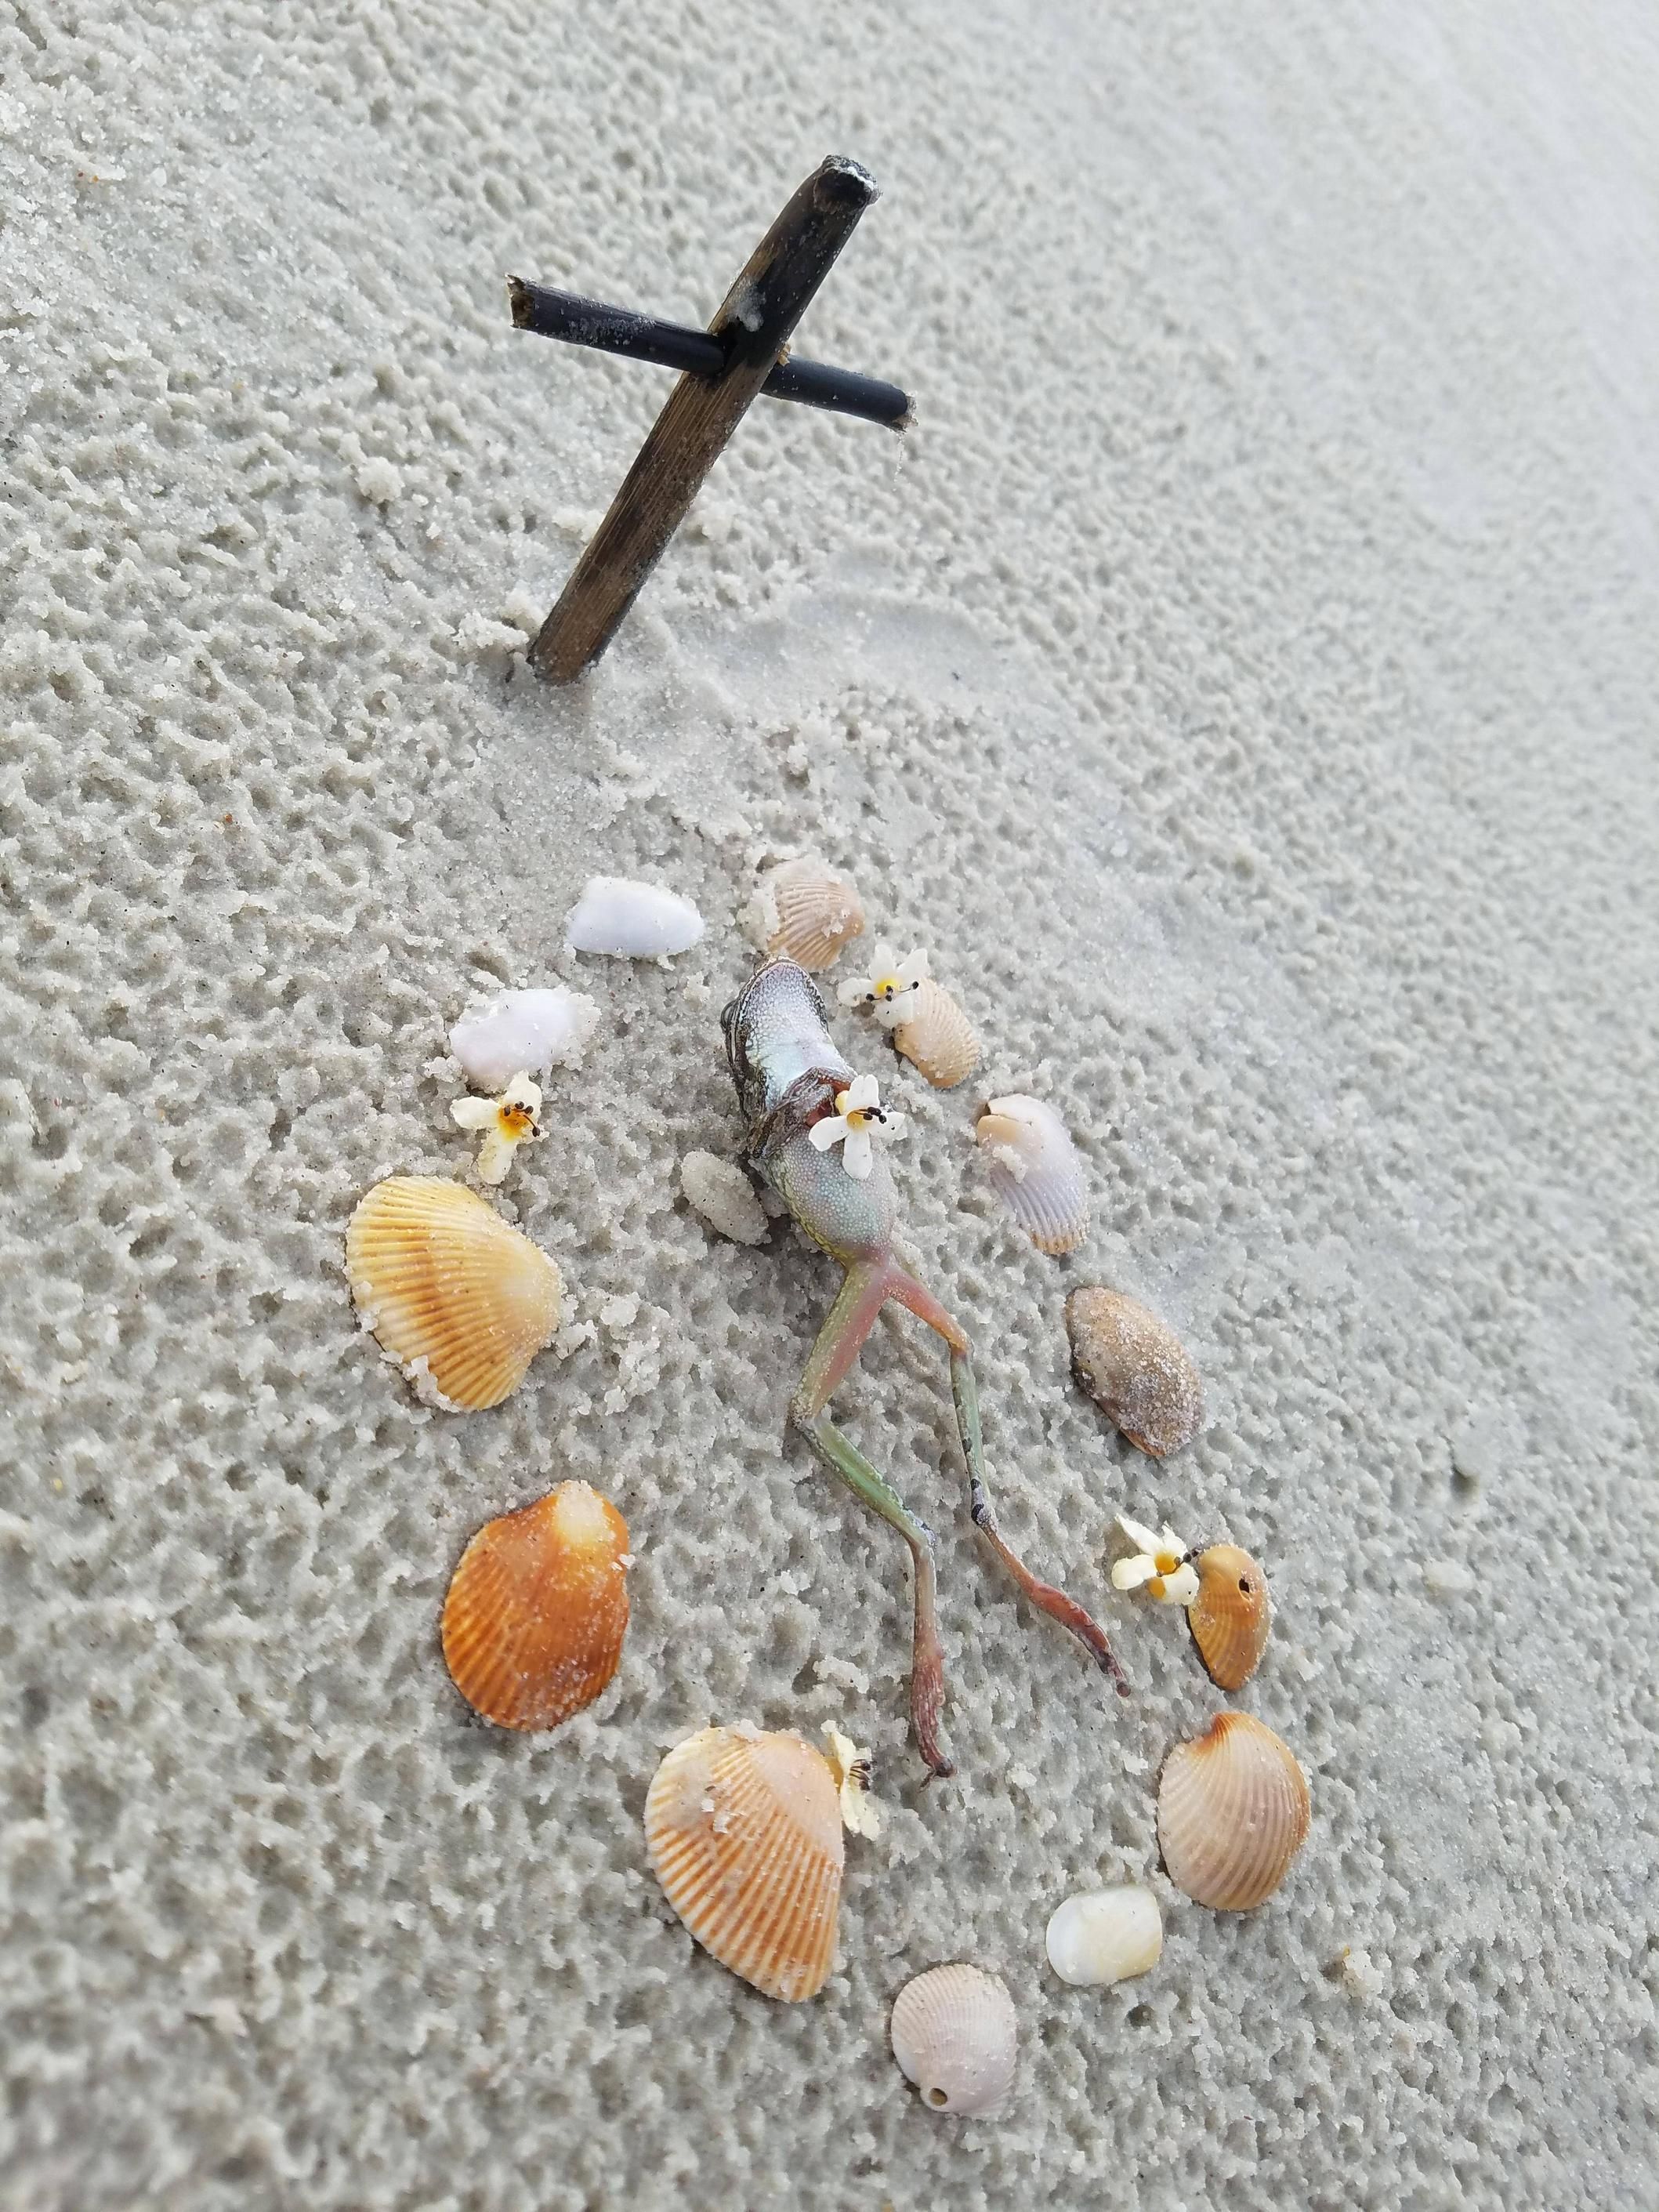 I found a dead frog on the beach and decided to give him a proper funeral.